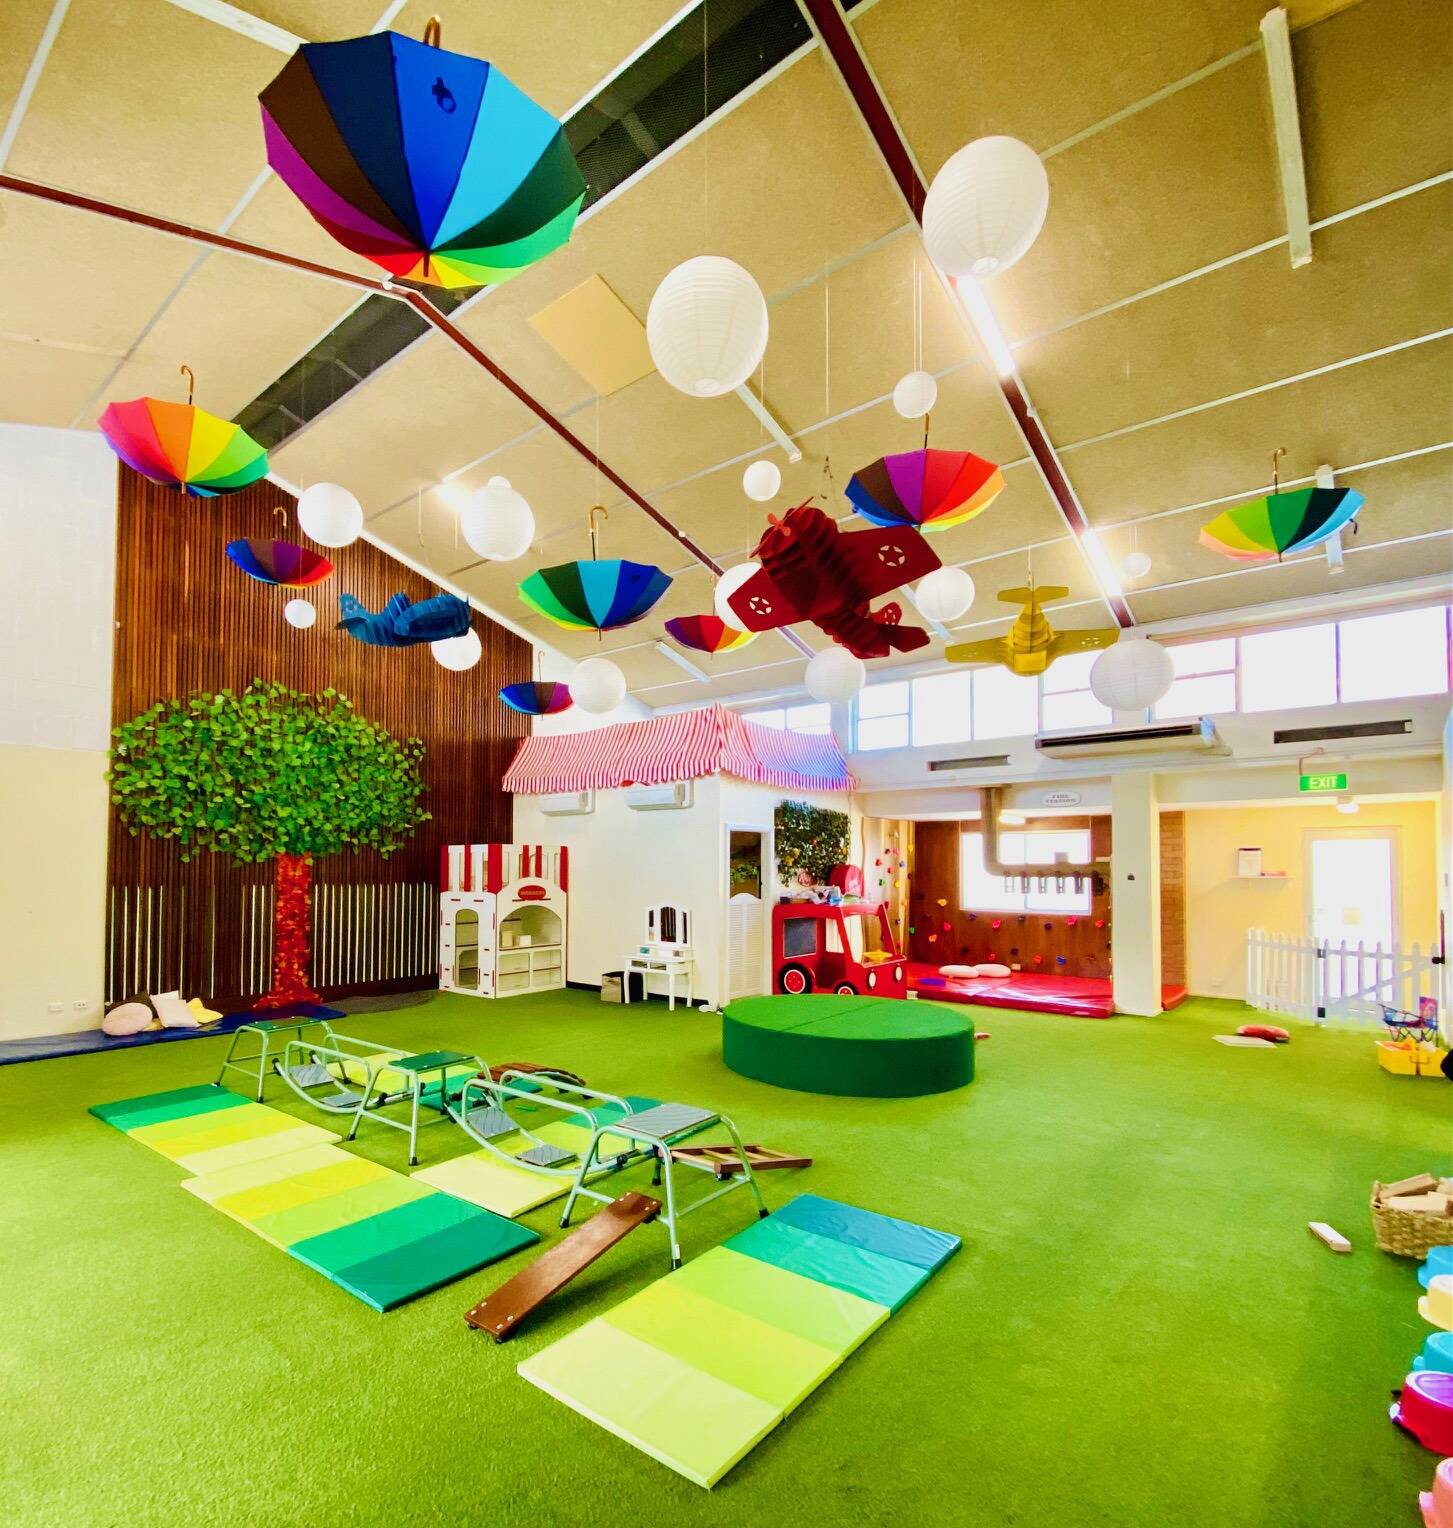 Studio 64 Early Learning and Kindergarten South Perth